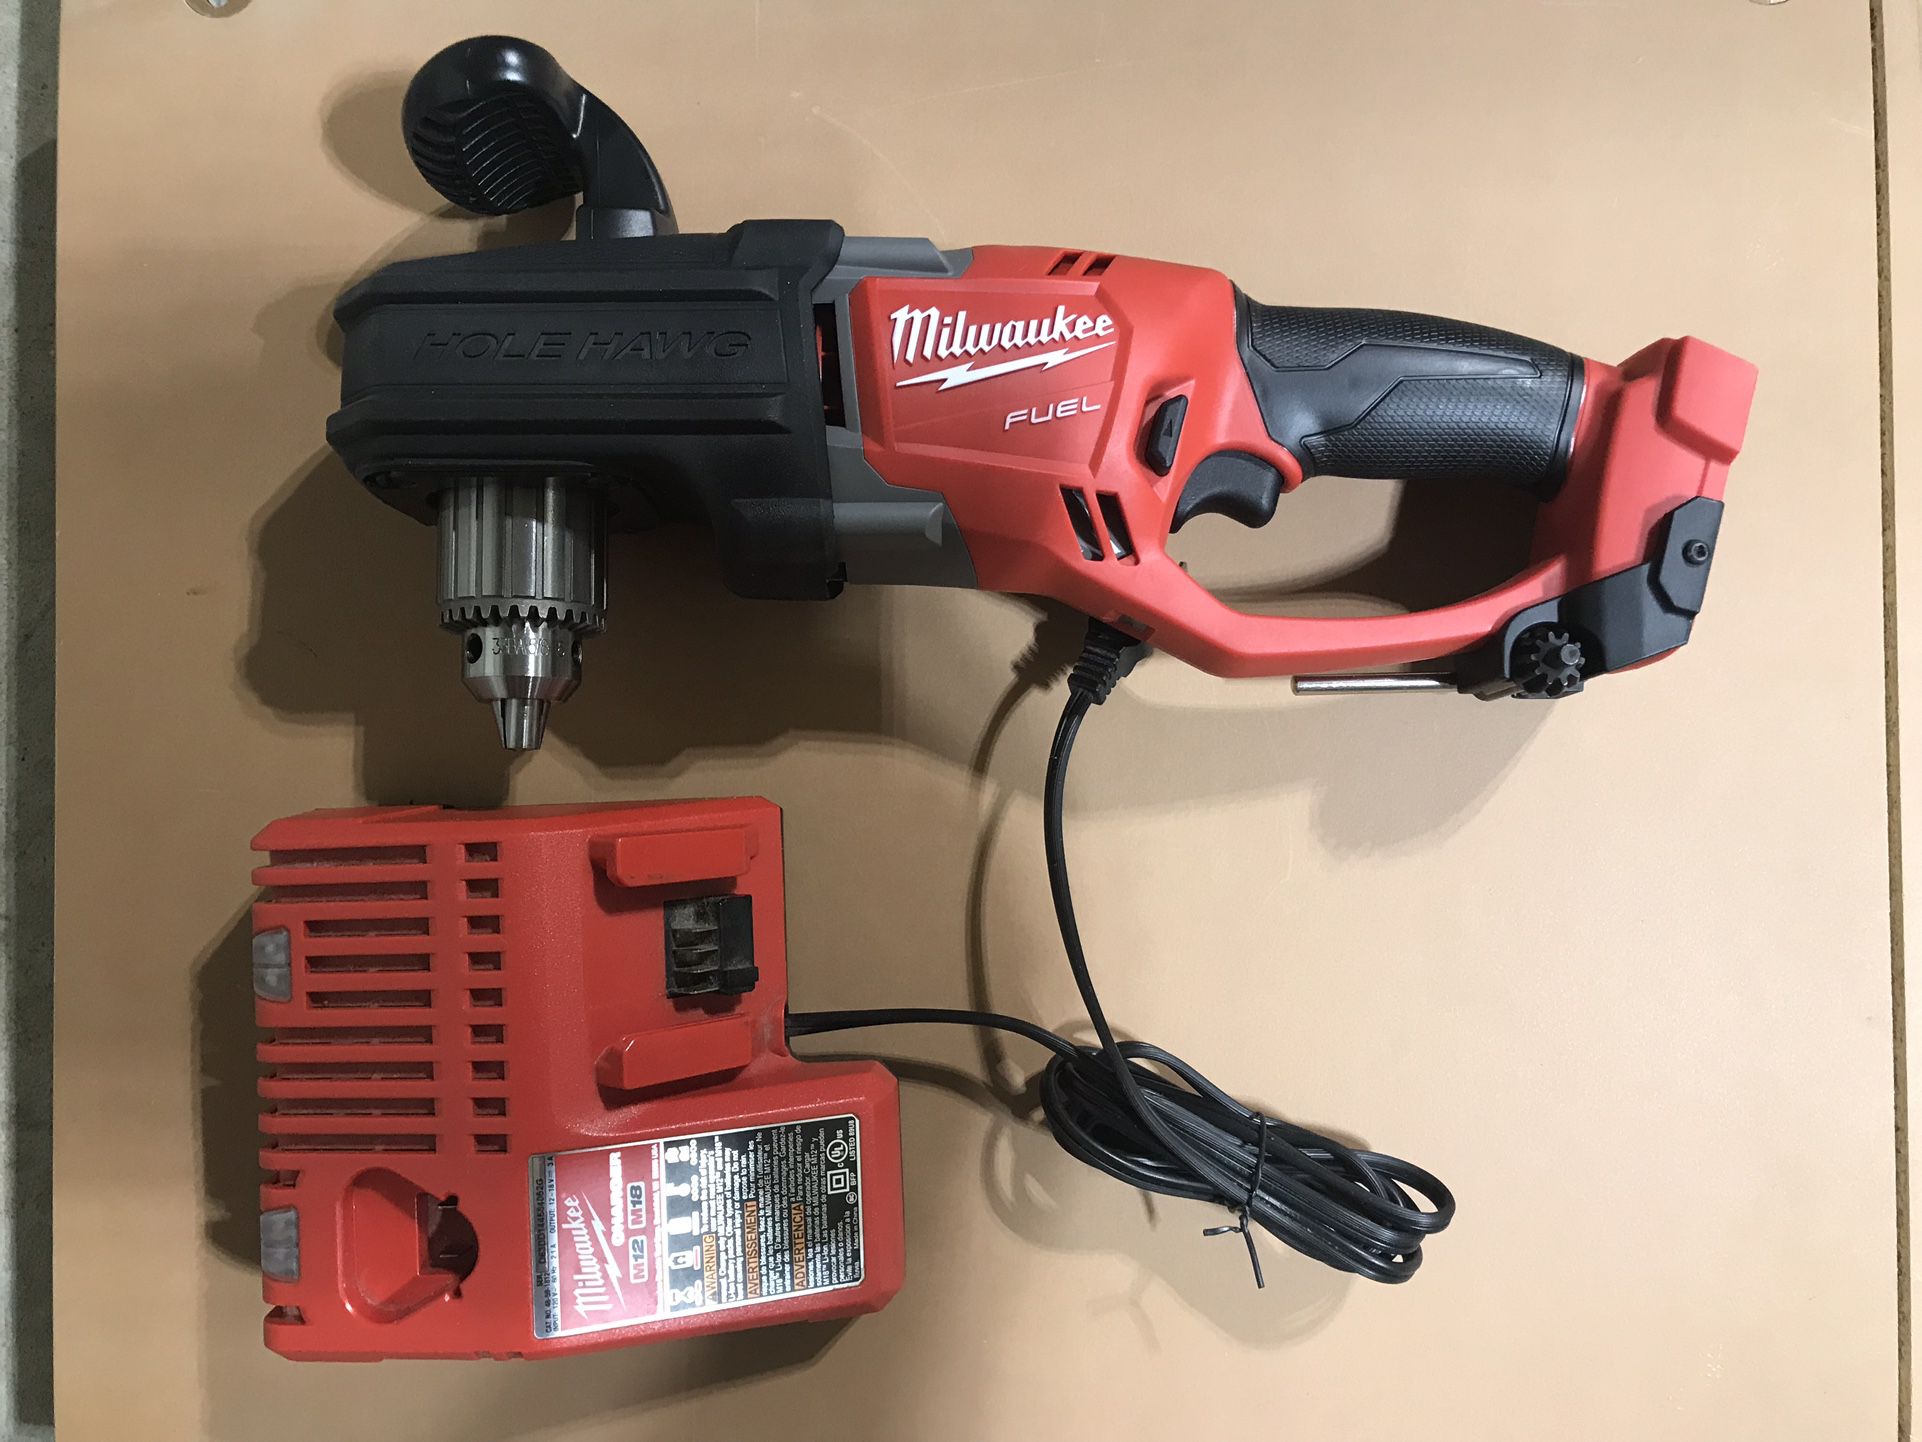 Milwaukee M18 Hole Hawg 1/2” Angle Drill W/Charger